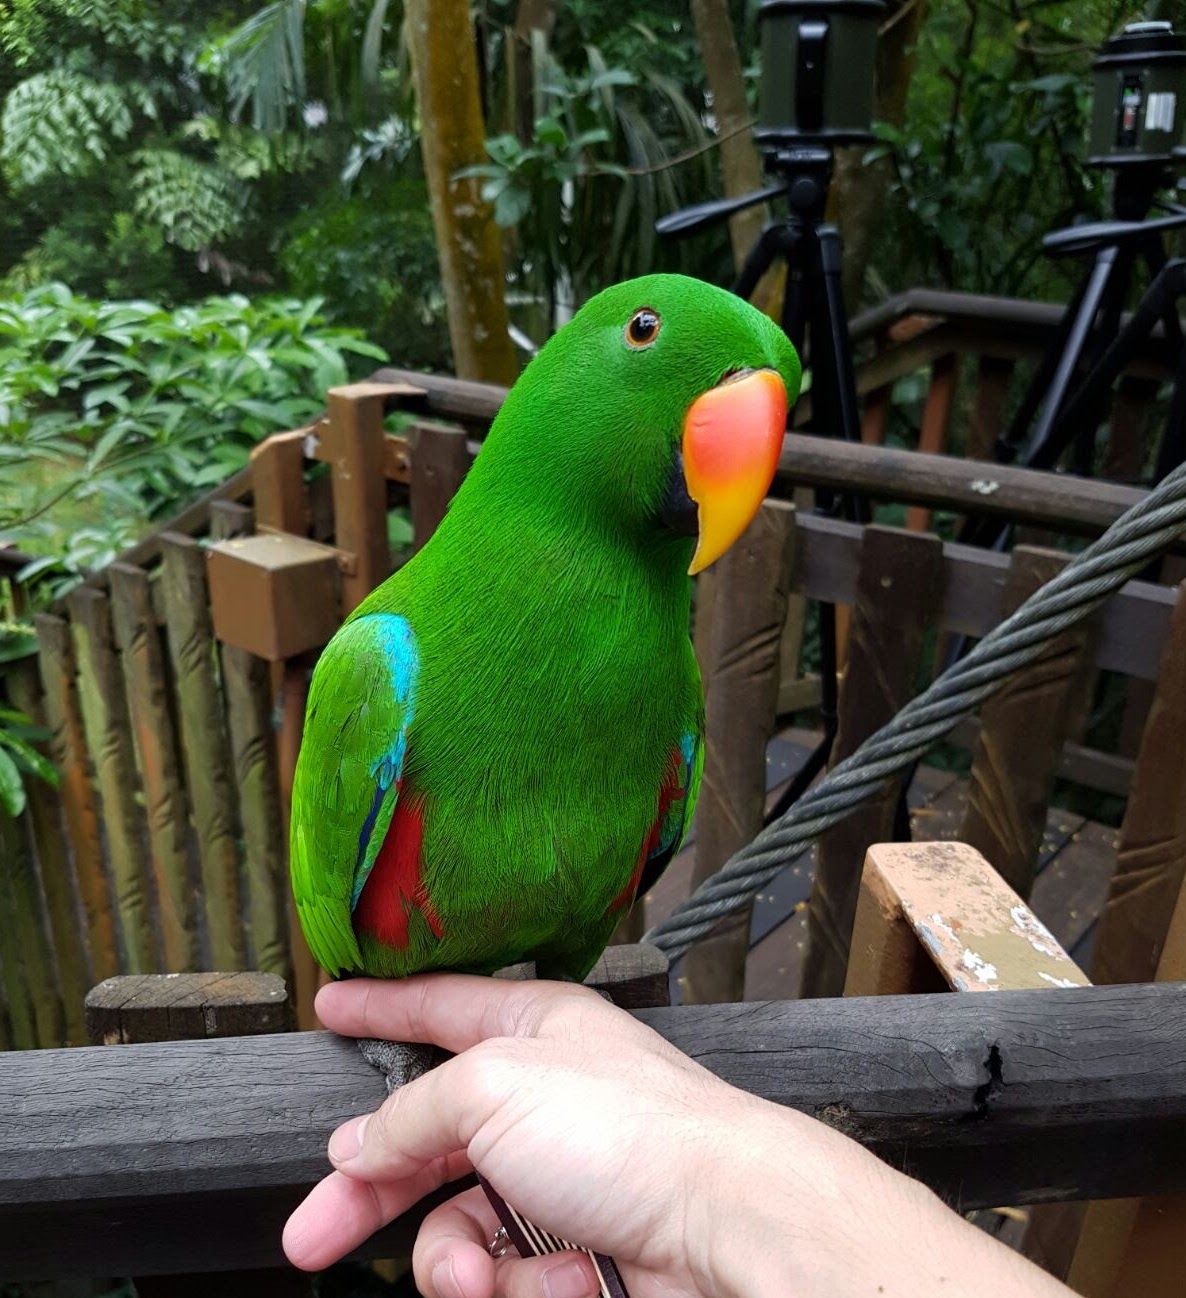 A bright green male eclectus parrot perched on a wooden handrail amidst a tropical forest backdrop. A hand outstretched towards the feet of the bird as if inviting it to perch on finger offered